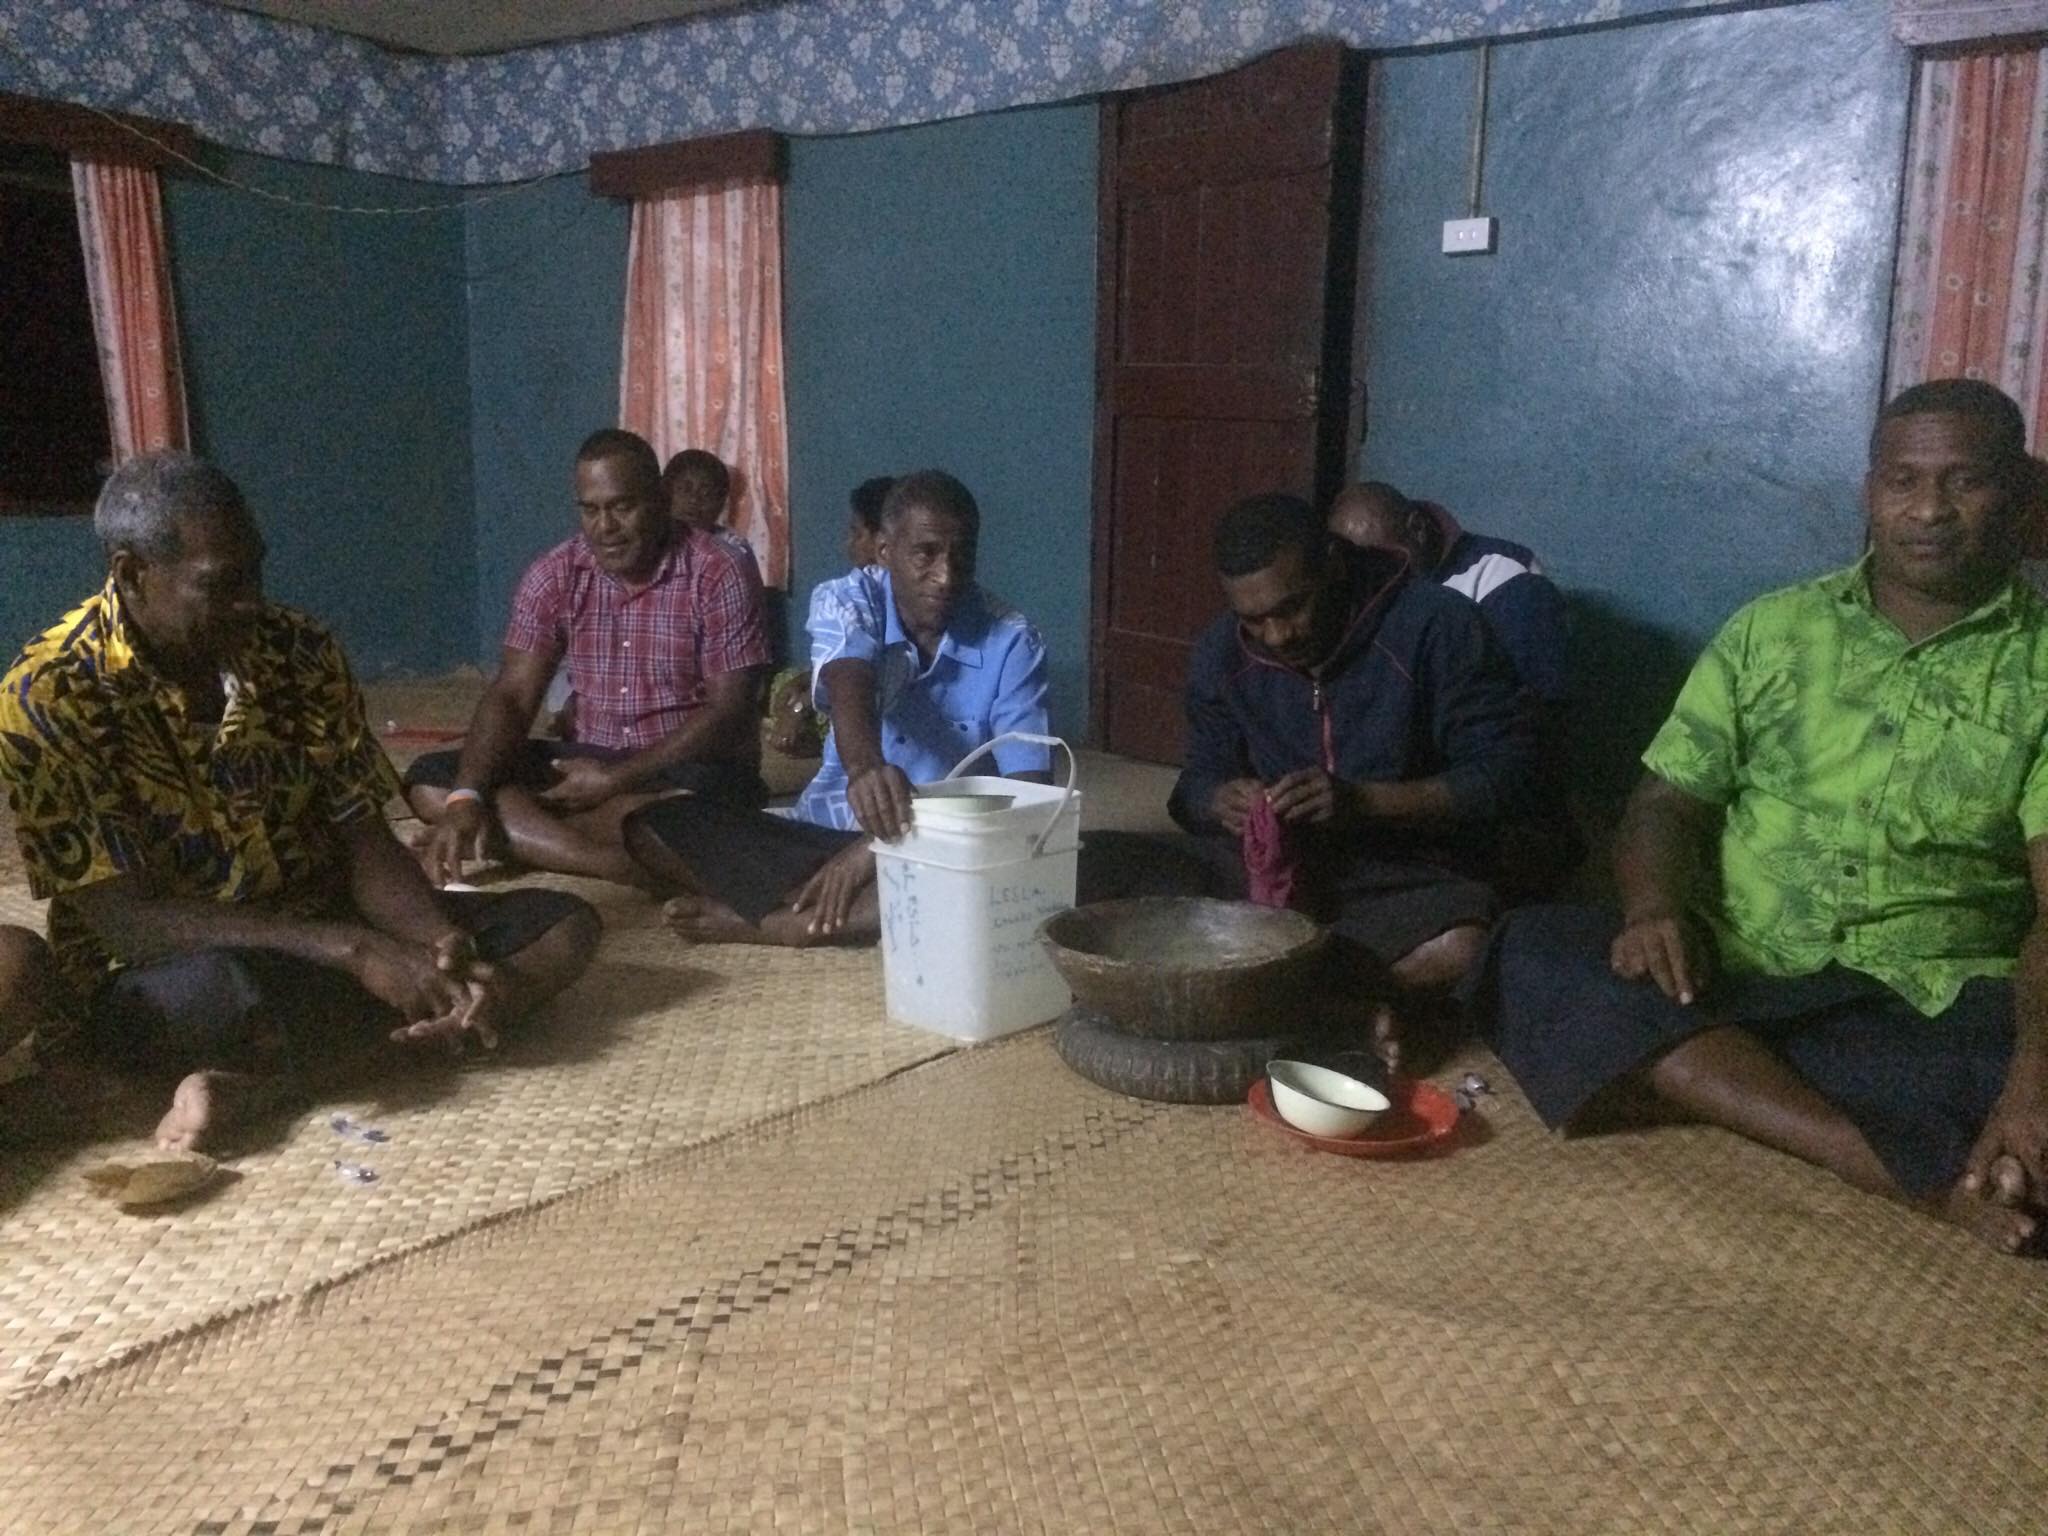 A vibrant scene of community togetherness in a Fijian village during a Kava night. Sitting in a circle, holding coconut shell cups filled with Kava, a traditional Fijian drink. The atmosphere is warm and convivial, reflecting the spirit of shared culture and camaraderie in Fiji